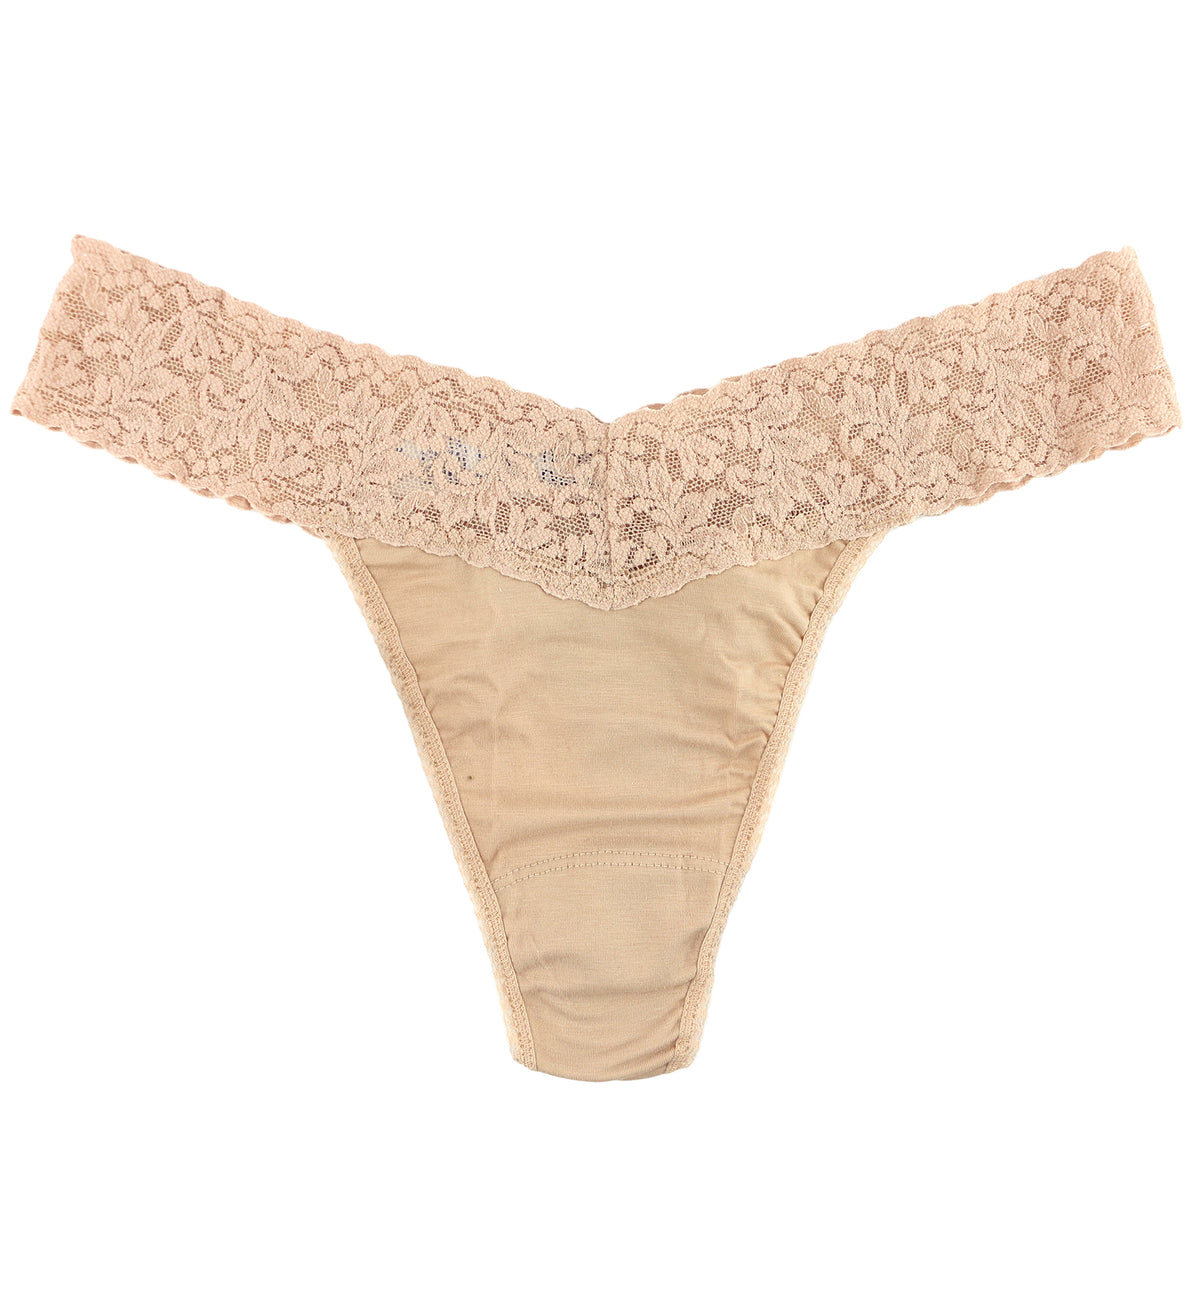 Hanky Panky Original Rise Organic Cotton Thong with Lace (891801),Chai - Chai,One Size